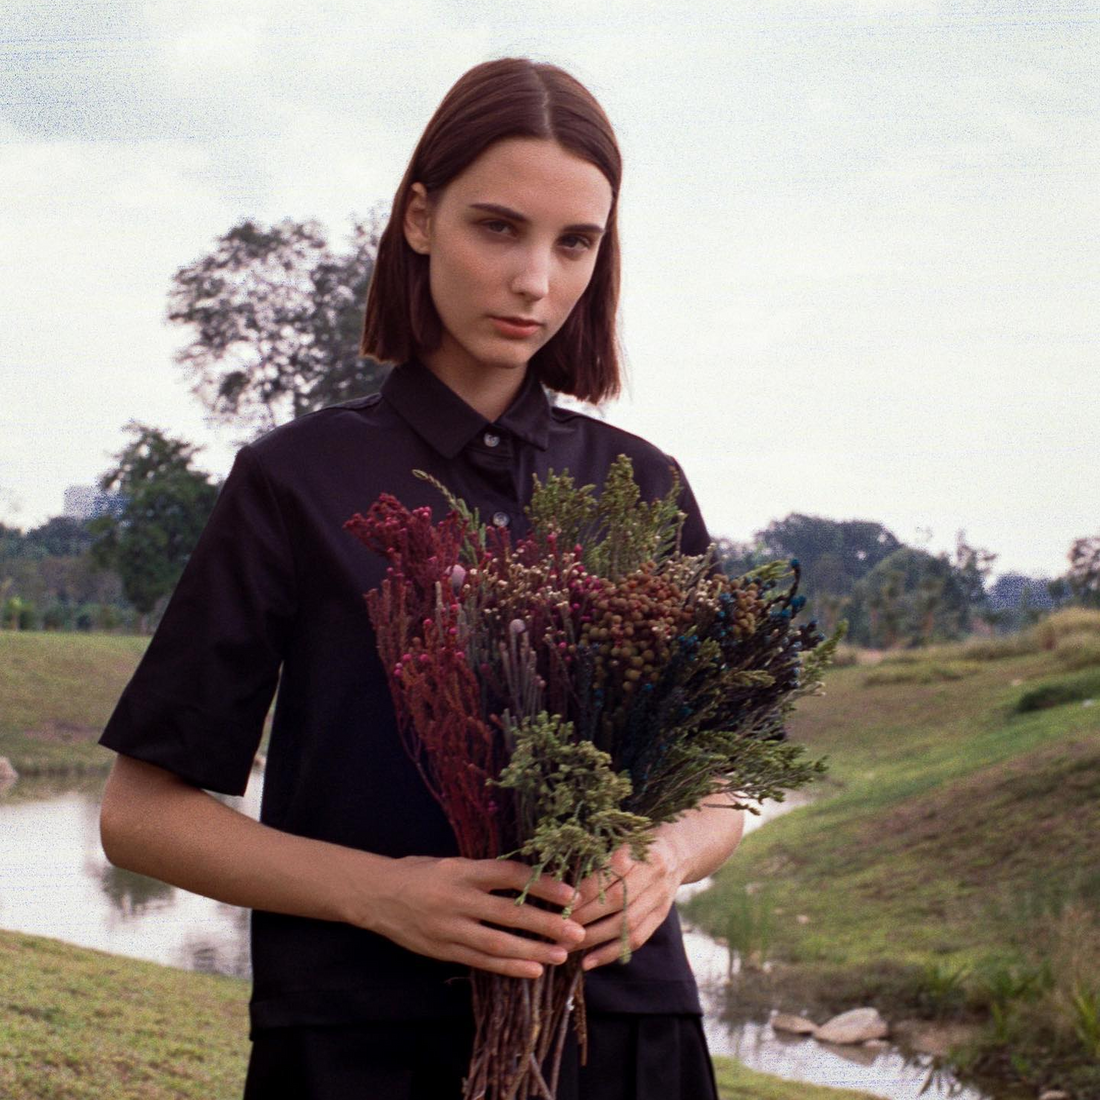 A woman with short dark brown hair stands in a field. She is wearing a black shirt dress and is holding a bunch of flowers